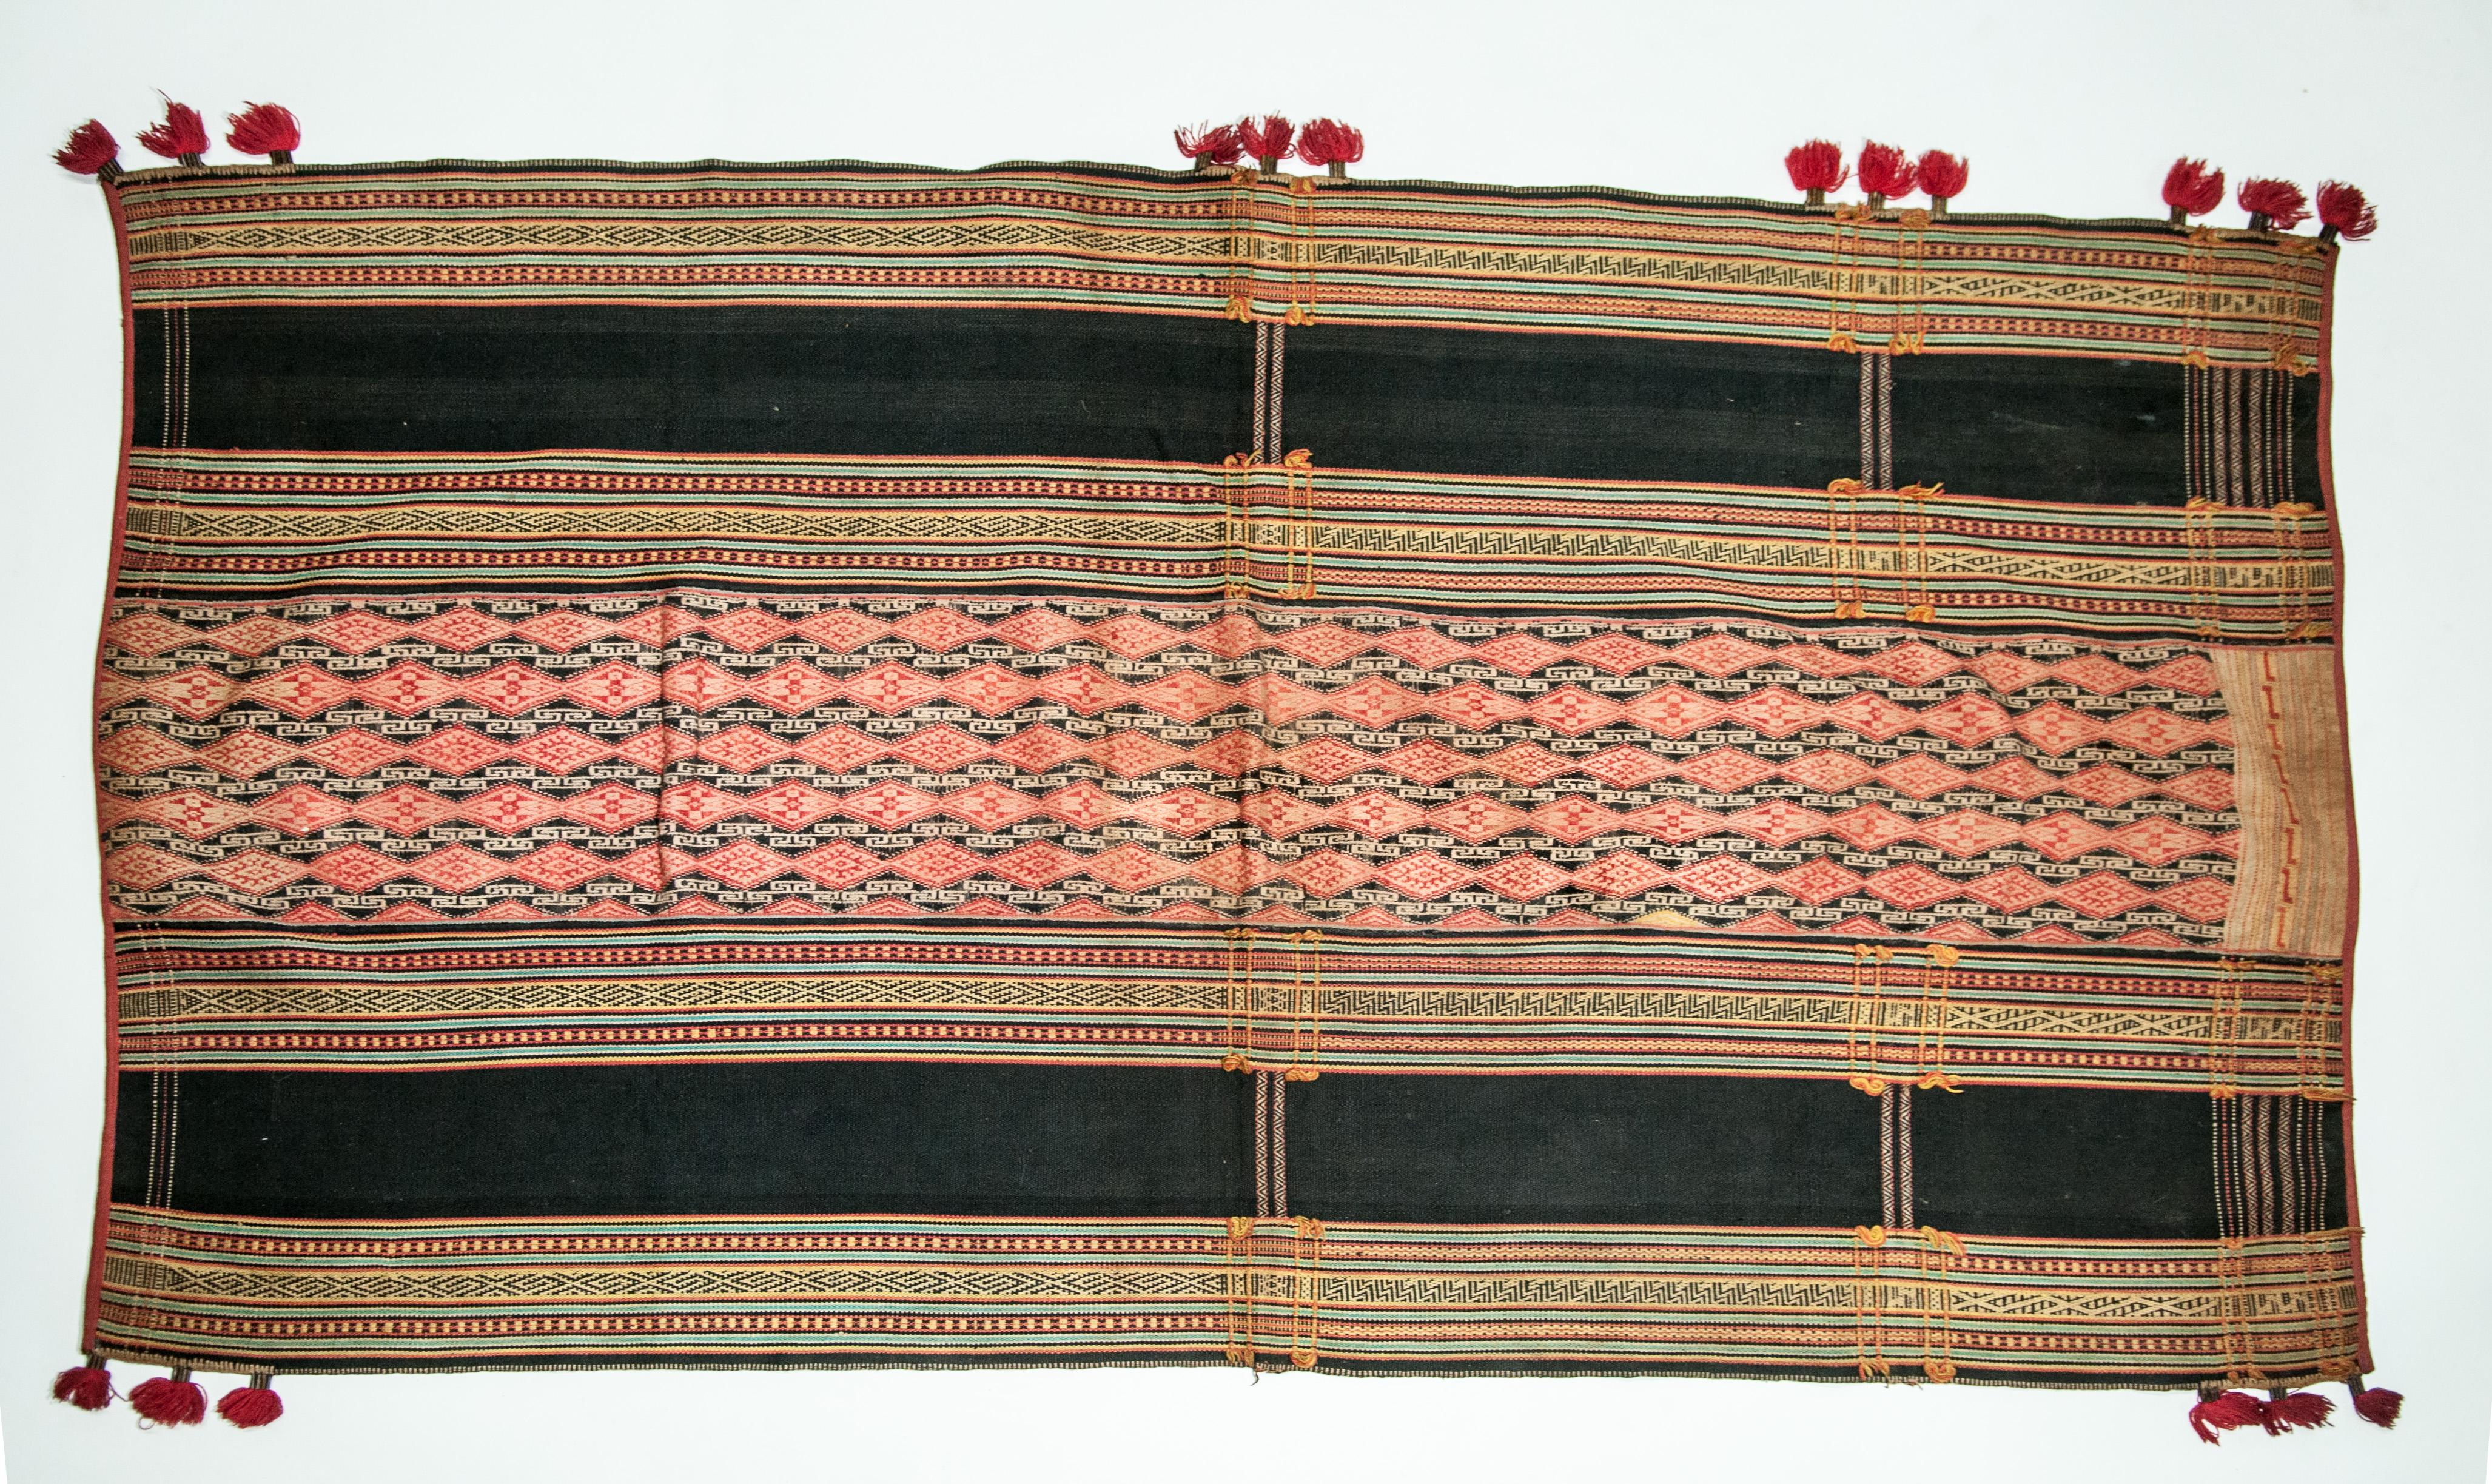 Mid-20th century cotton skirt from the Maa or possibly X'tieng People of Lam Dong Province, Central Highlands, Vietnam.
This sarong comprises three panels, each woven on a traditional backstrap loom and then sewn together. It showcases detailed